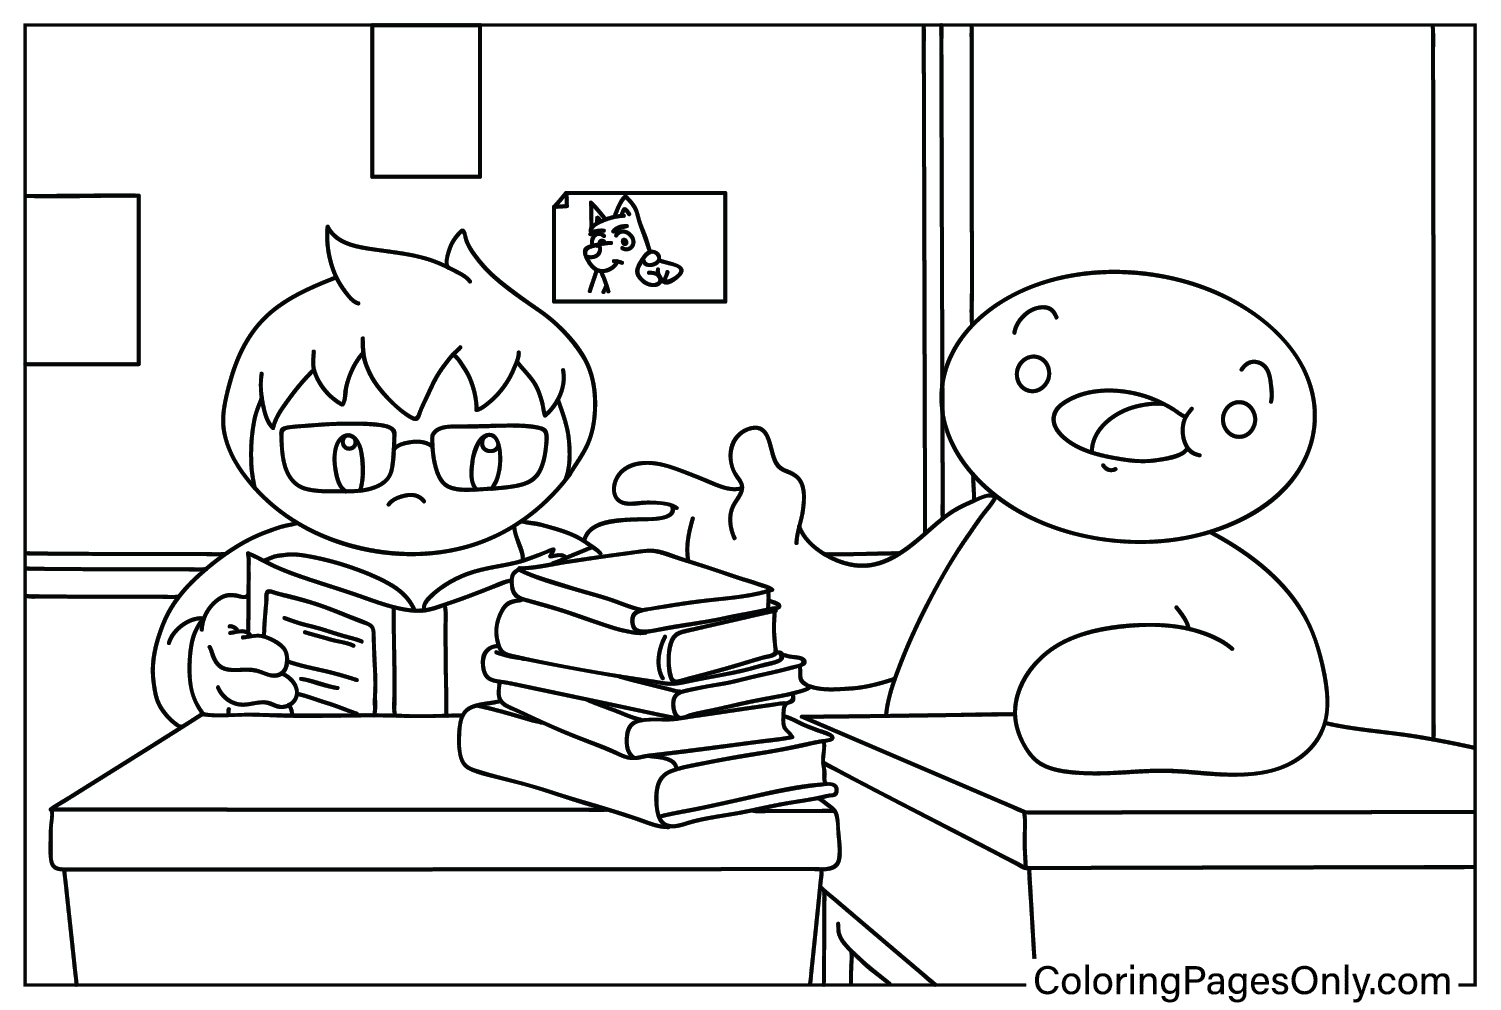 TheOdd1sOut Images to Color from TheOdd1sOut